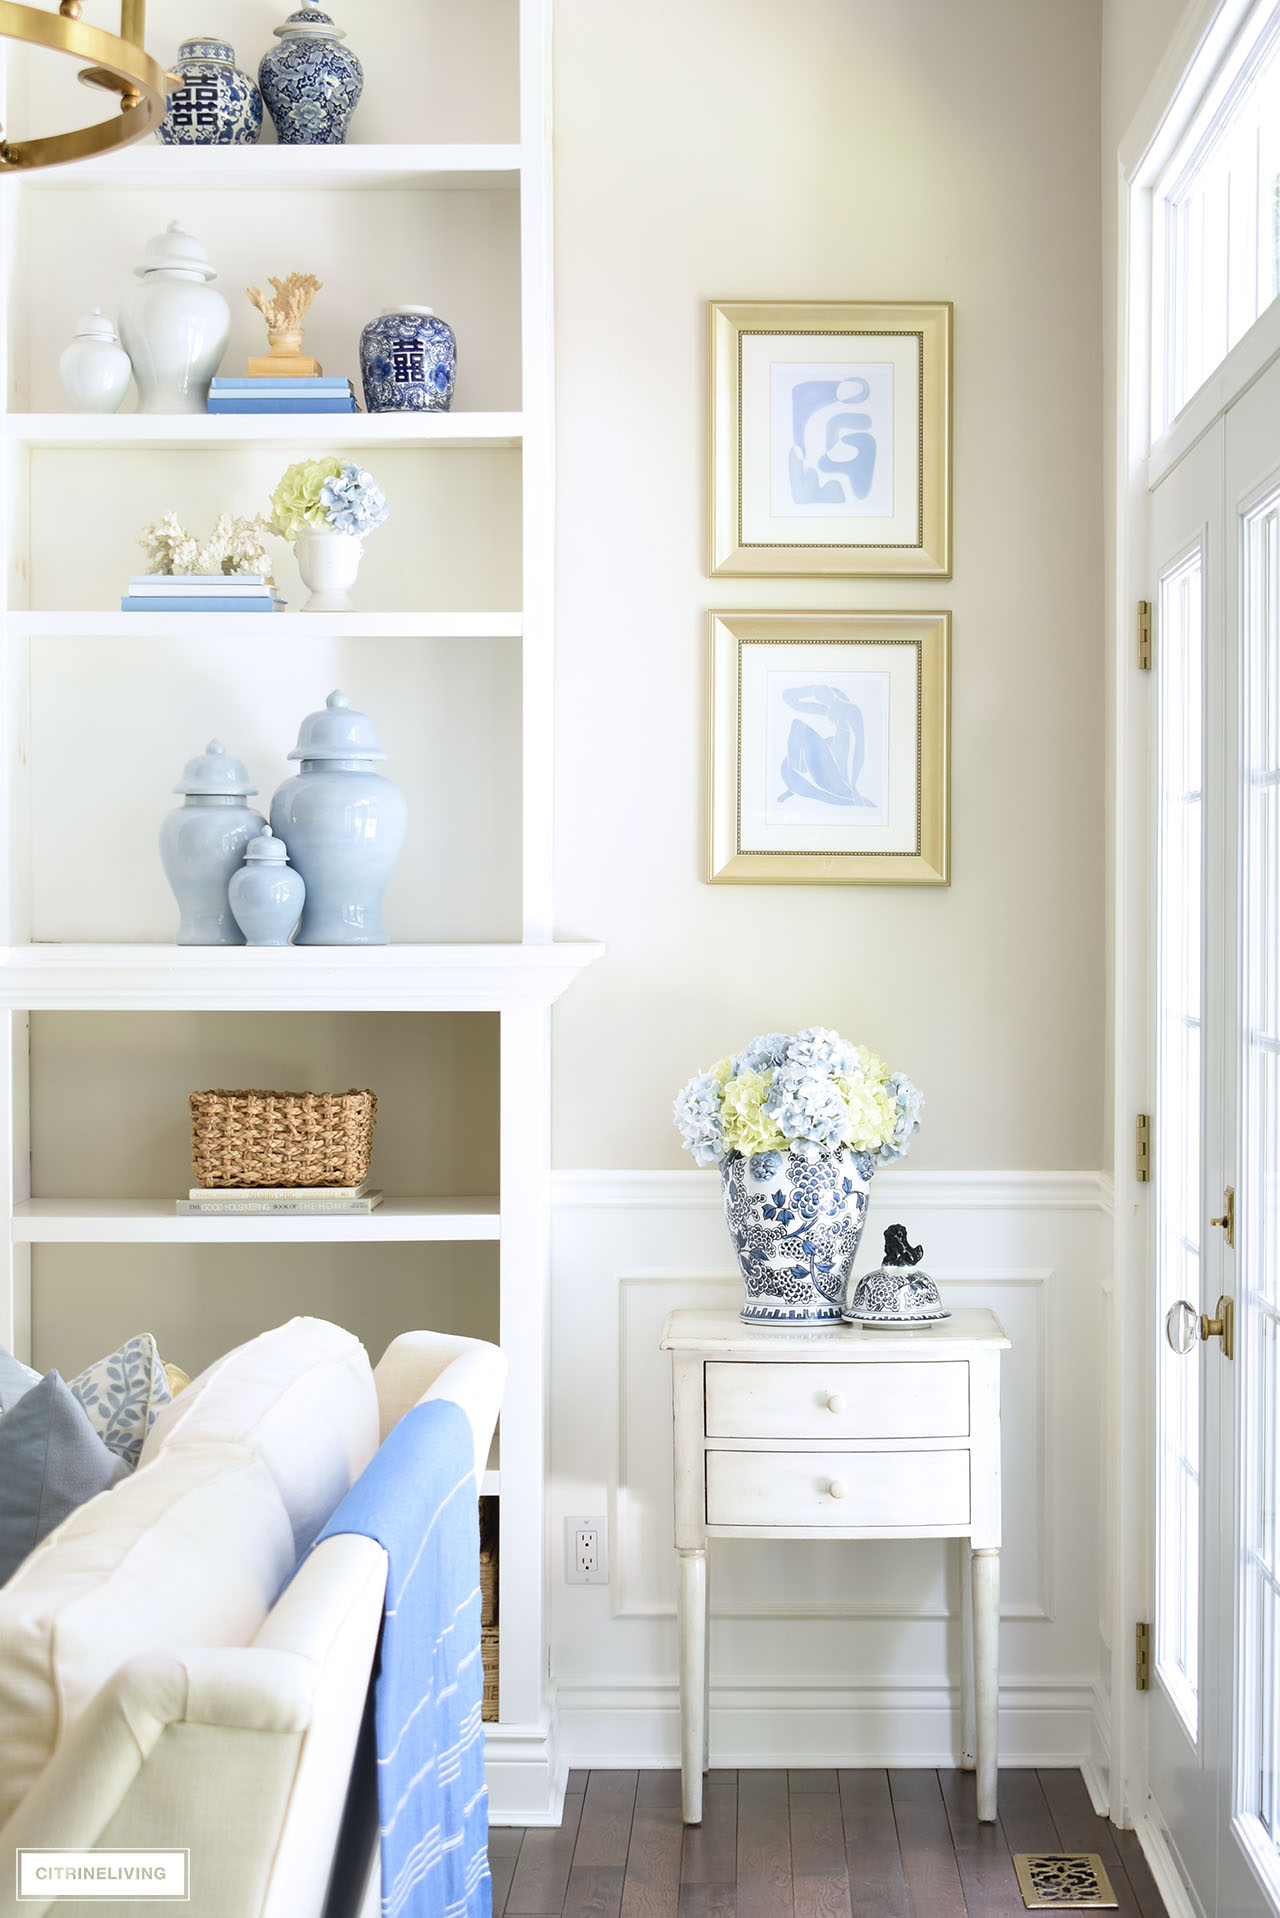 Living room bookshelves decorated for summer with coastal touches, and a combinations of blue and white chinoiserie and solid ginger jars.